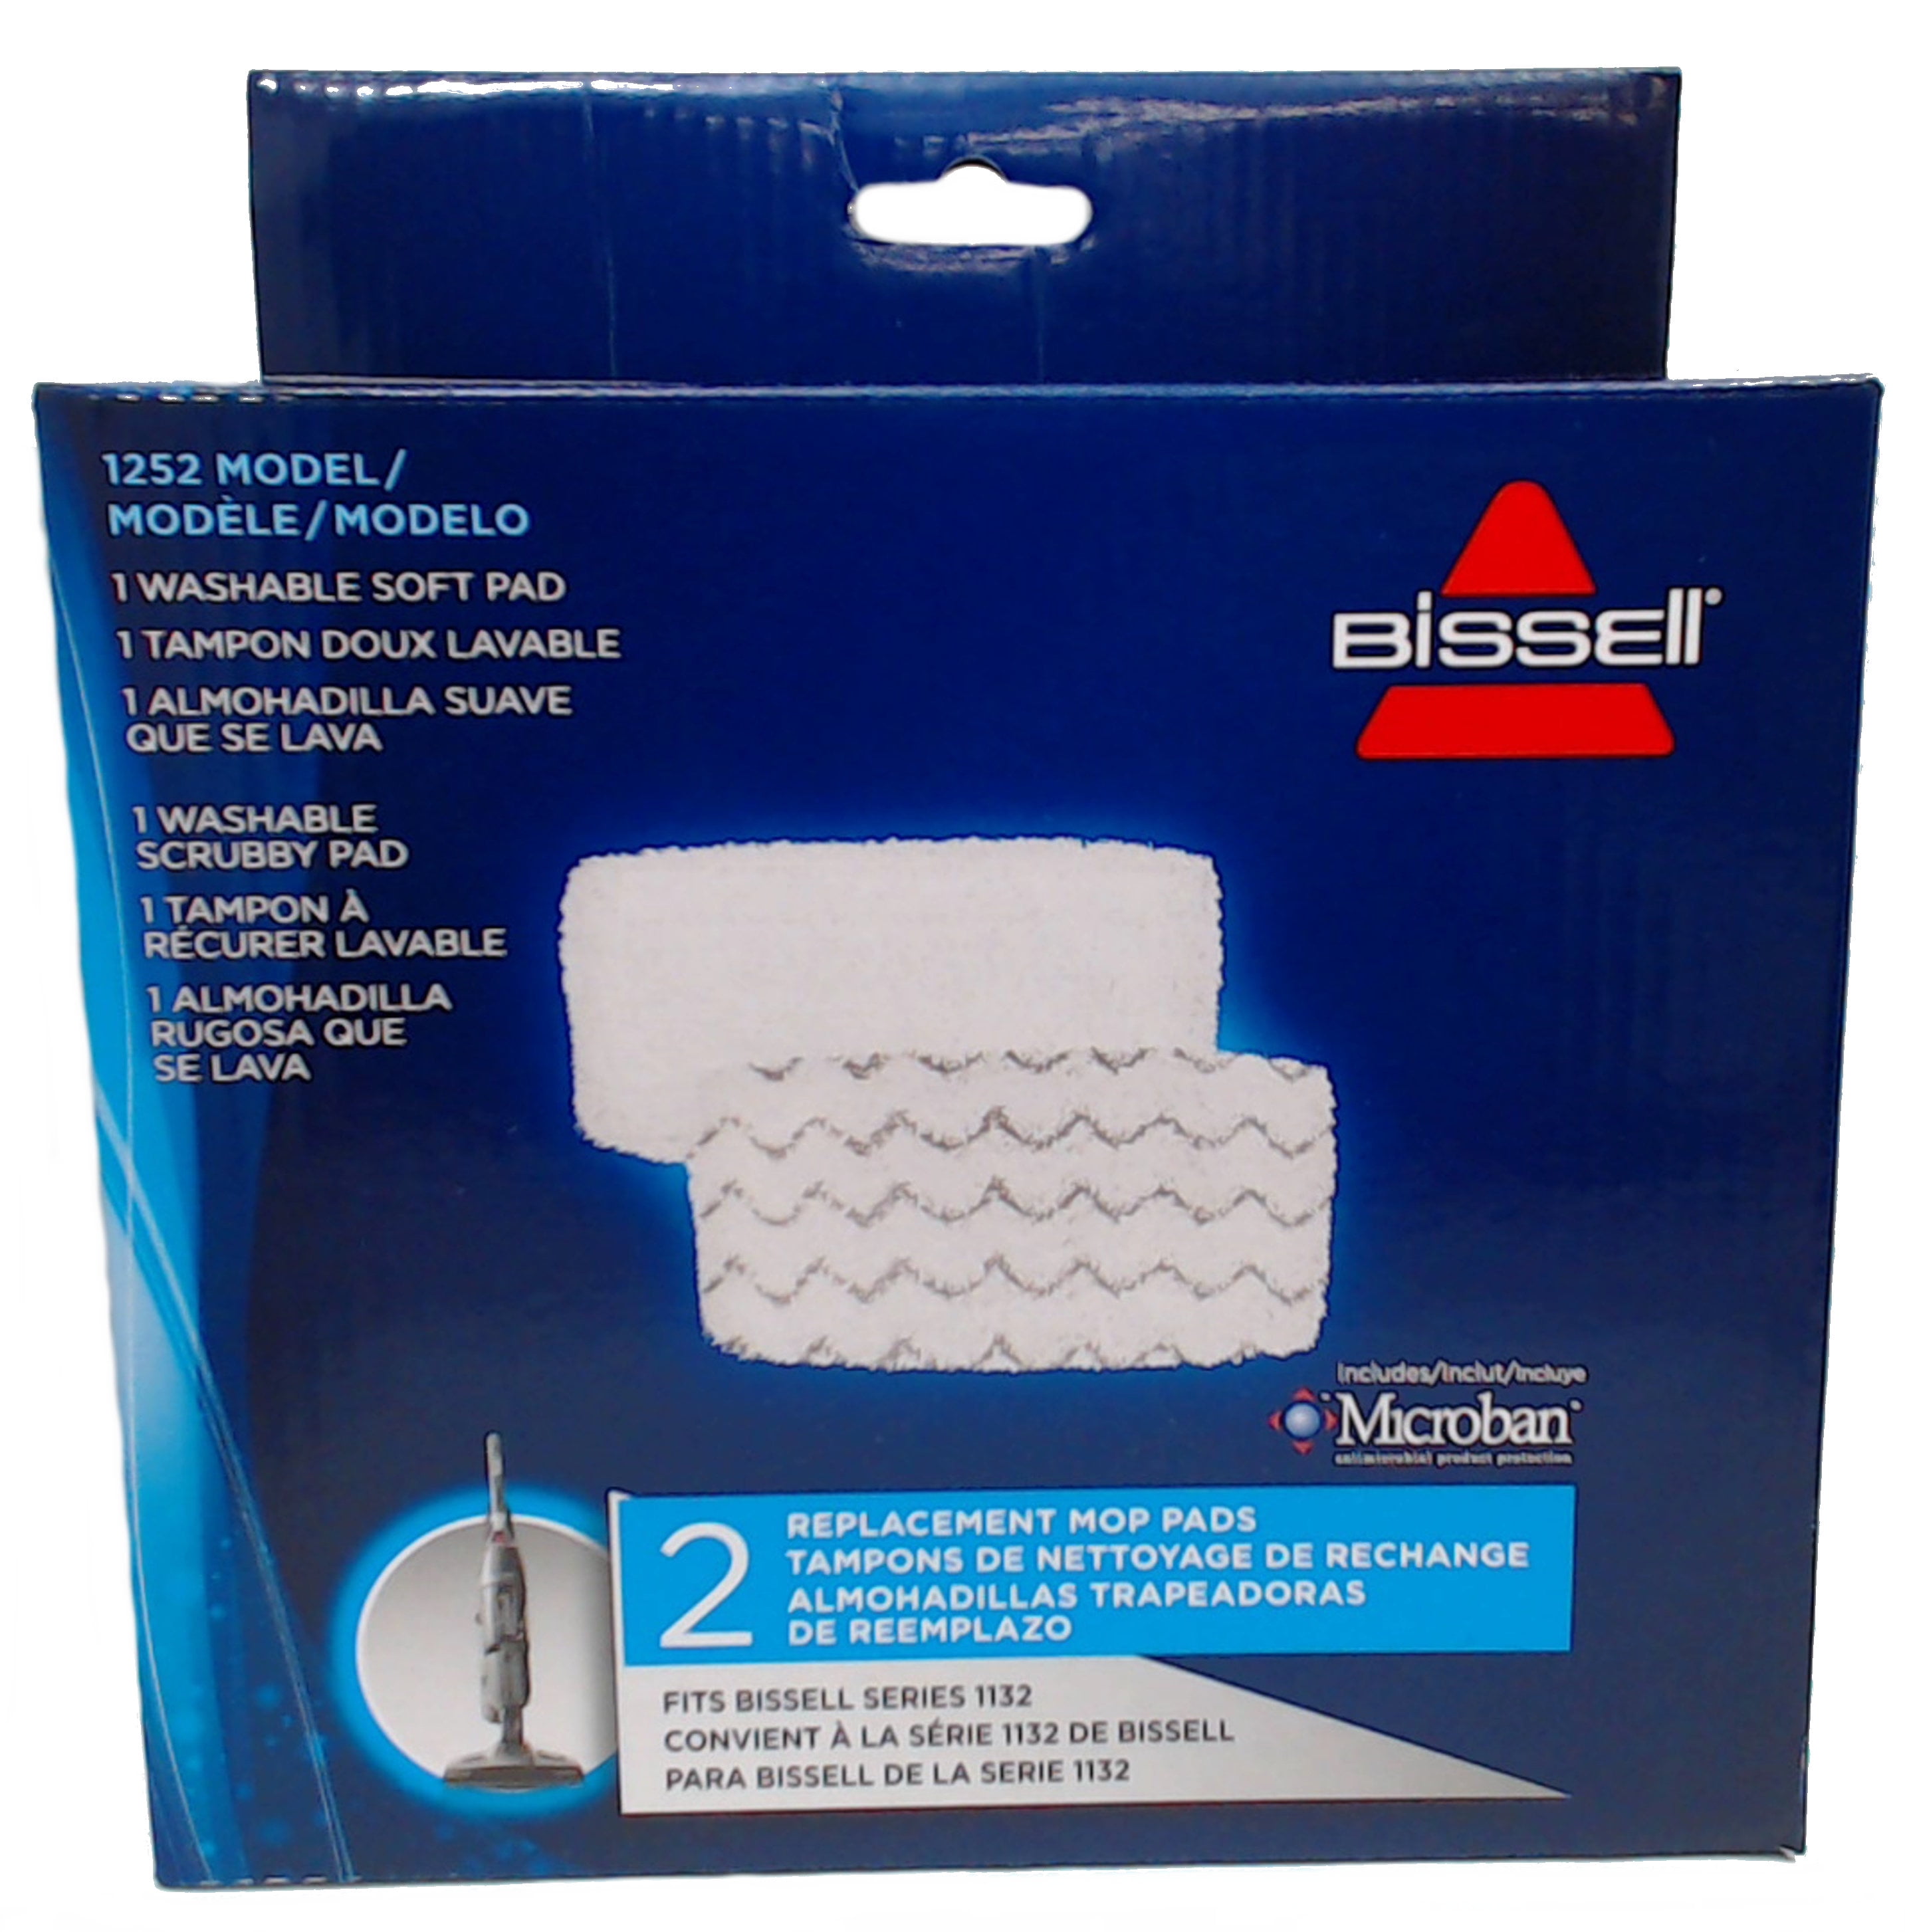 4 Pads compatible w Bissell Symphony Steam Mop 1252 1606670 1543 1652 1132 1530 